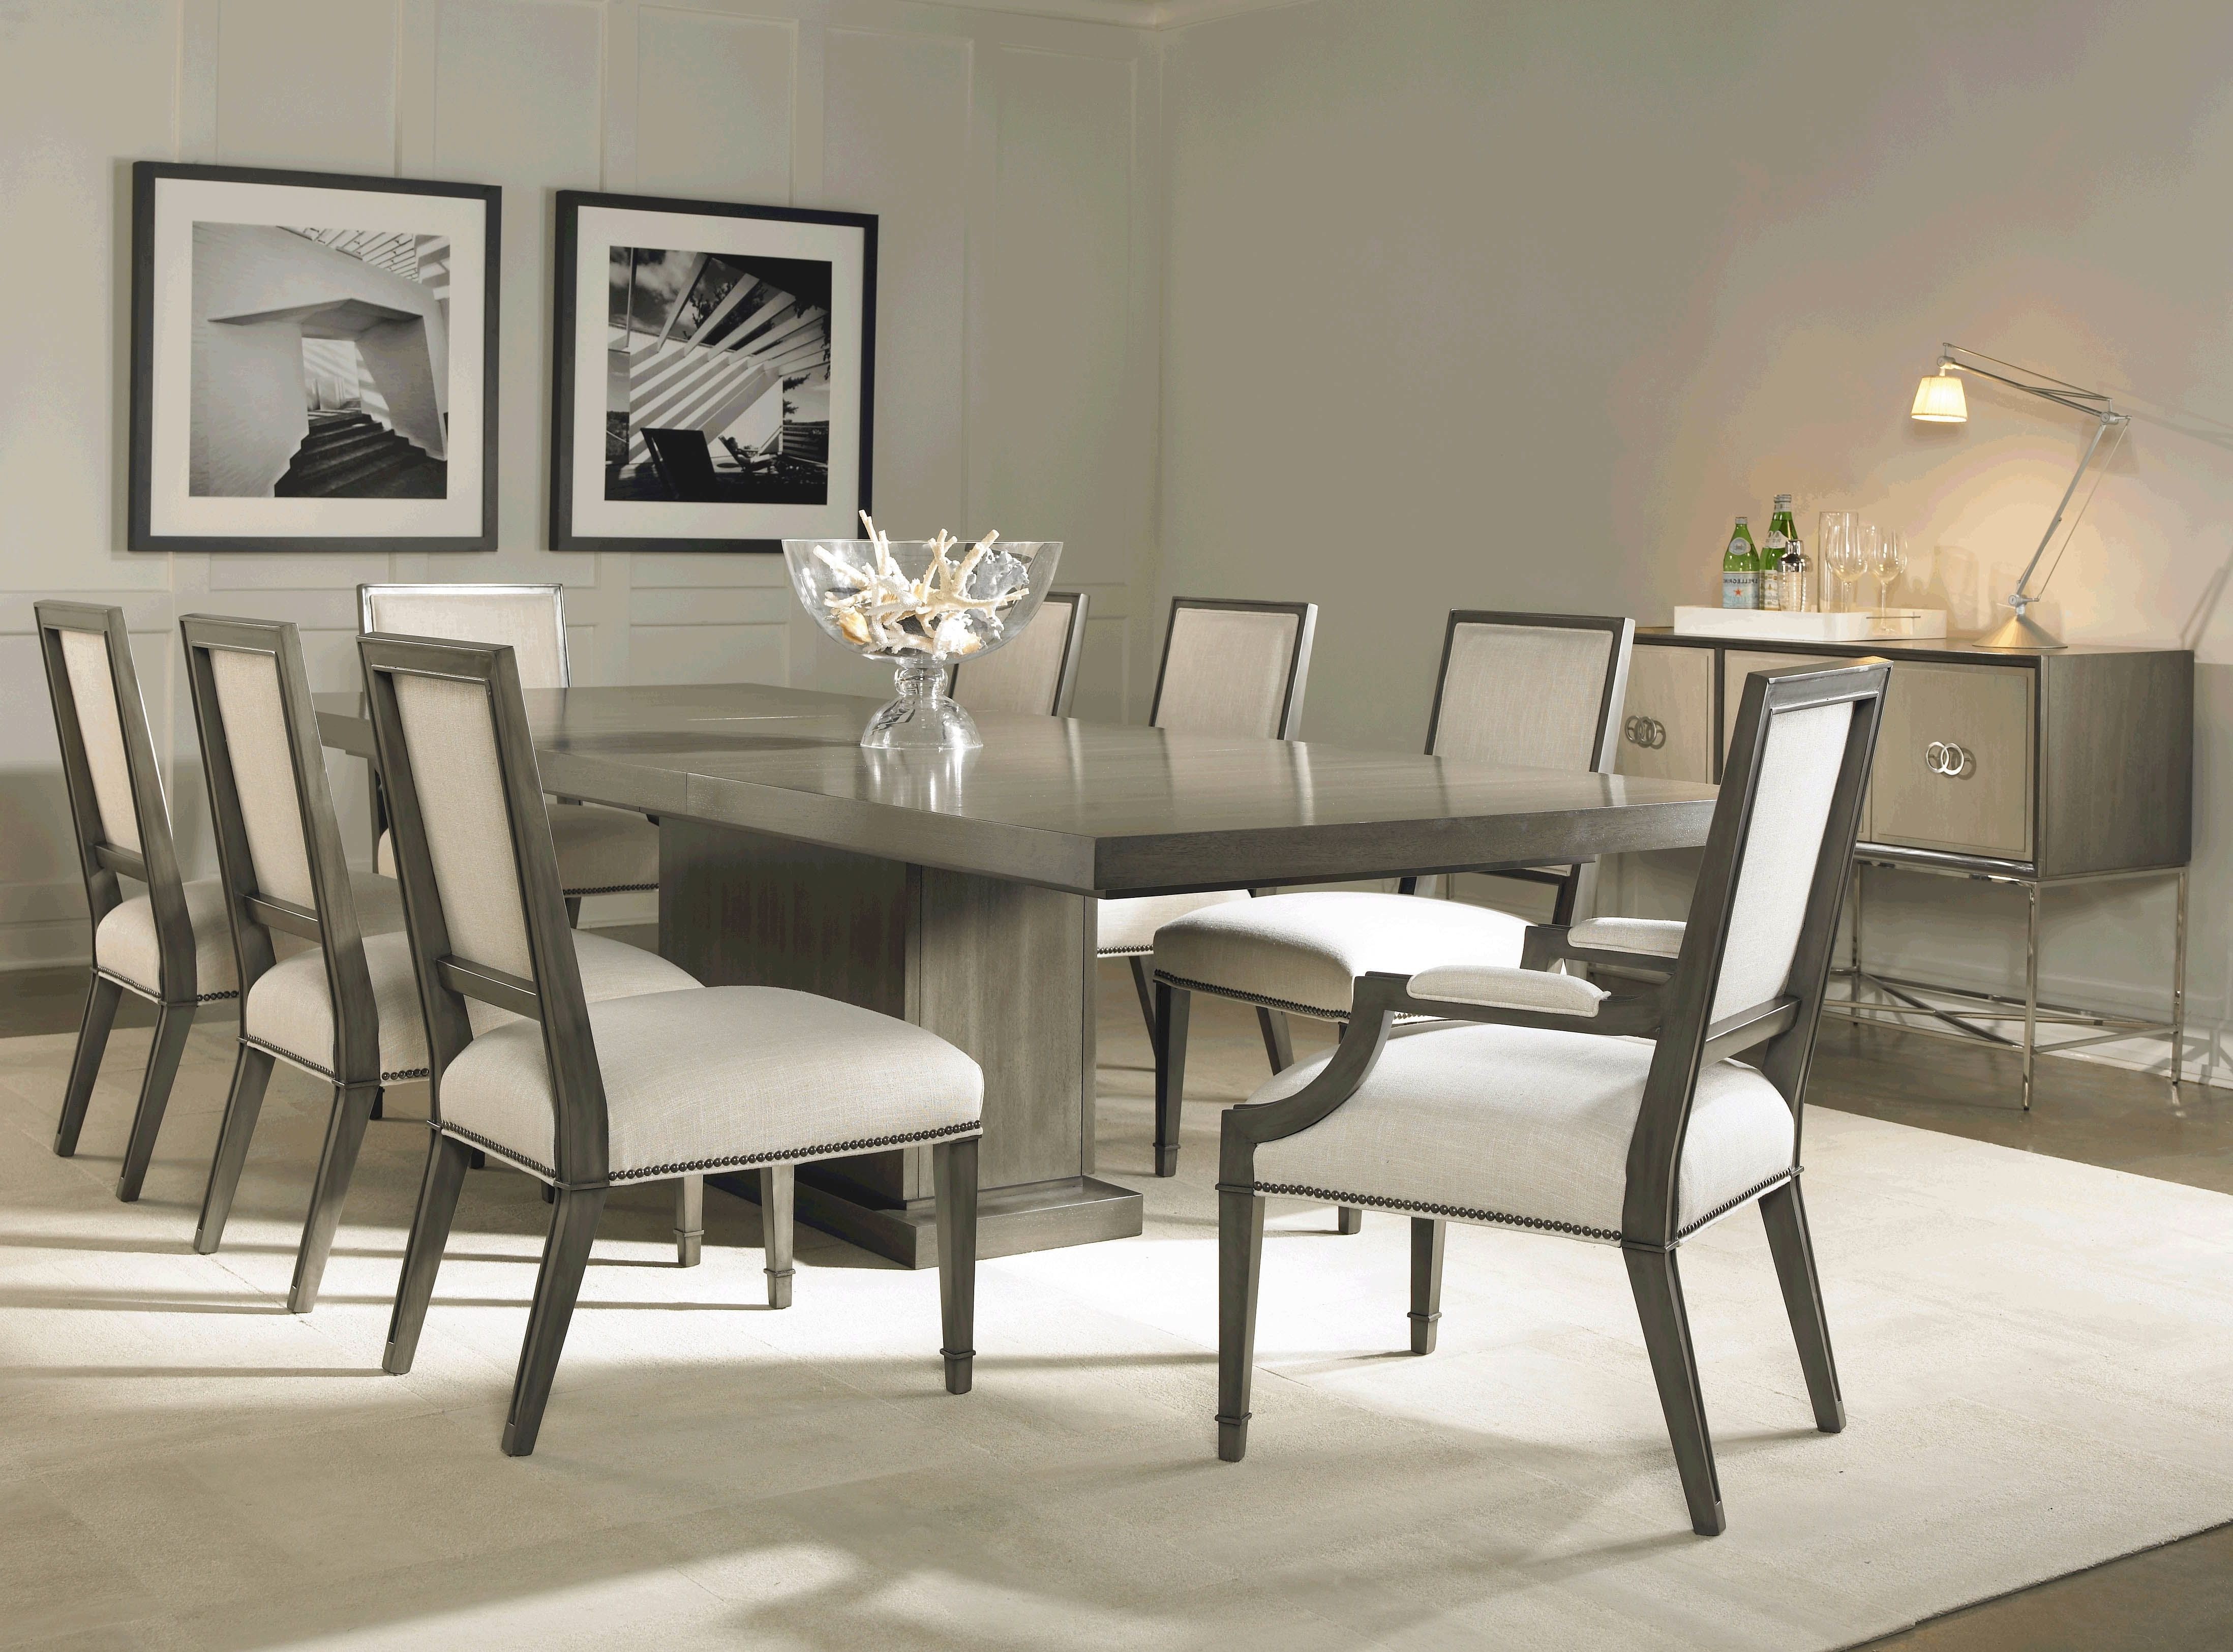 Bradford 7 Piece Dining Sets With Bardstown Side Chairs Regarding Most Up To Date Bradford Dining Room Furniture – Homes Zone (View 15 of 25)